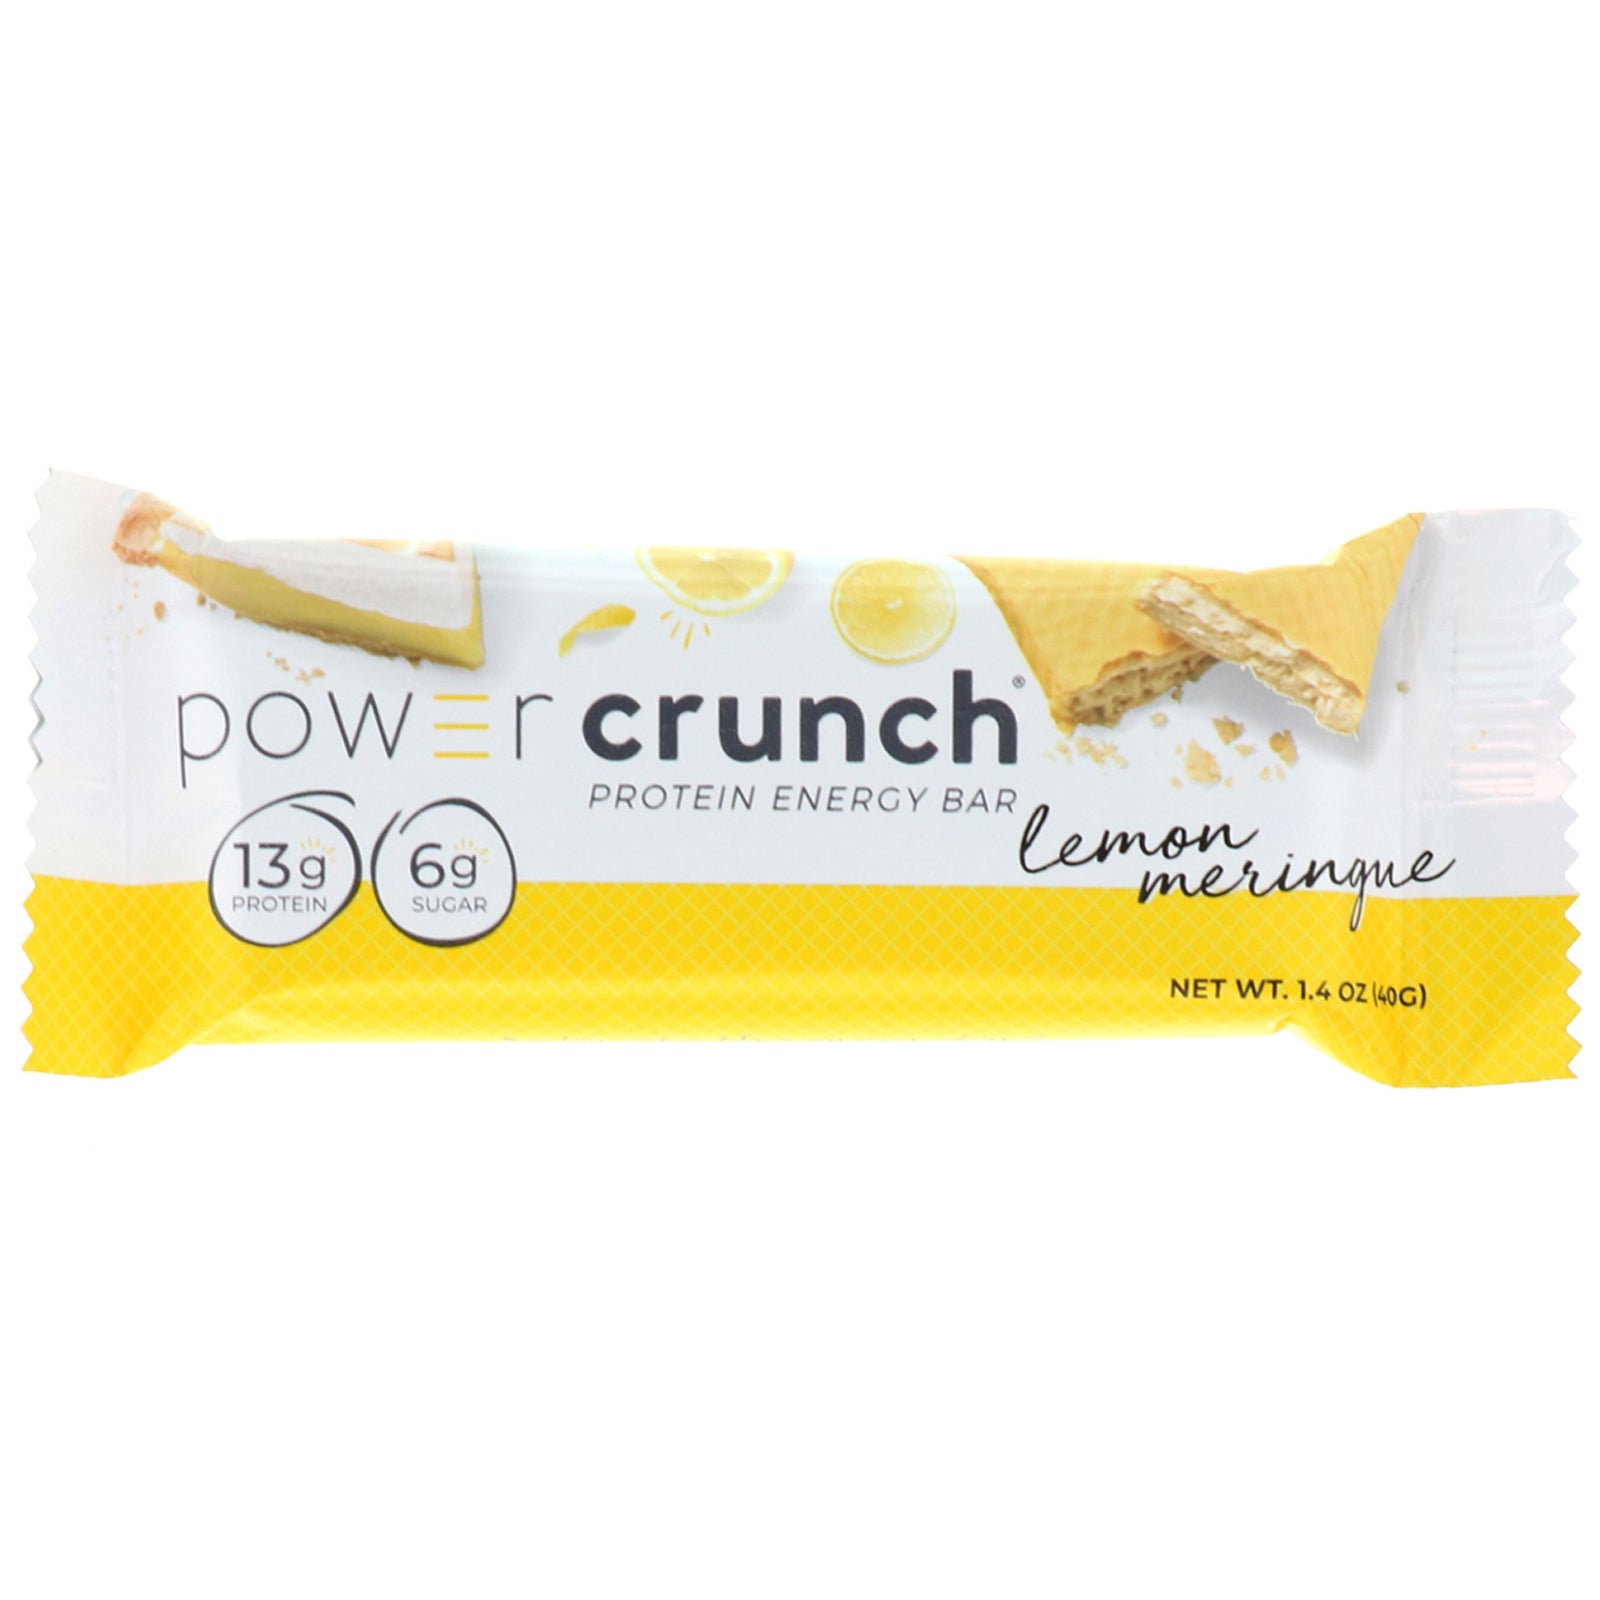 Power Crunch Protein Bar (1 bar) Protein Snacks Triple Chocolate,Chocolate Mint,Peanut Butter Fudge,Cookies and Cream,Mocha Creme,Salted Caramel BEST BEFORE NOV/2022,French Vanilla Creme BEST BY AUG 27/2022,Peanut Butter Creme,Red Velvet,Wild Berry Creme,Lemon Meringue,Key Lime Pie,Chocolate Coconut BEST BY MARCH 23/2022,S'mores Power Crunch